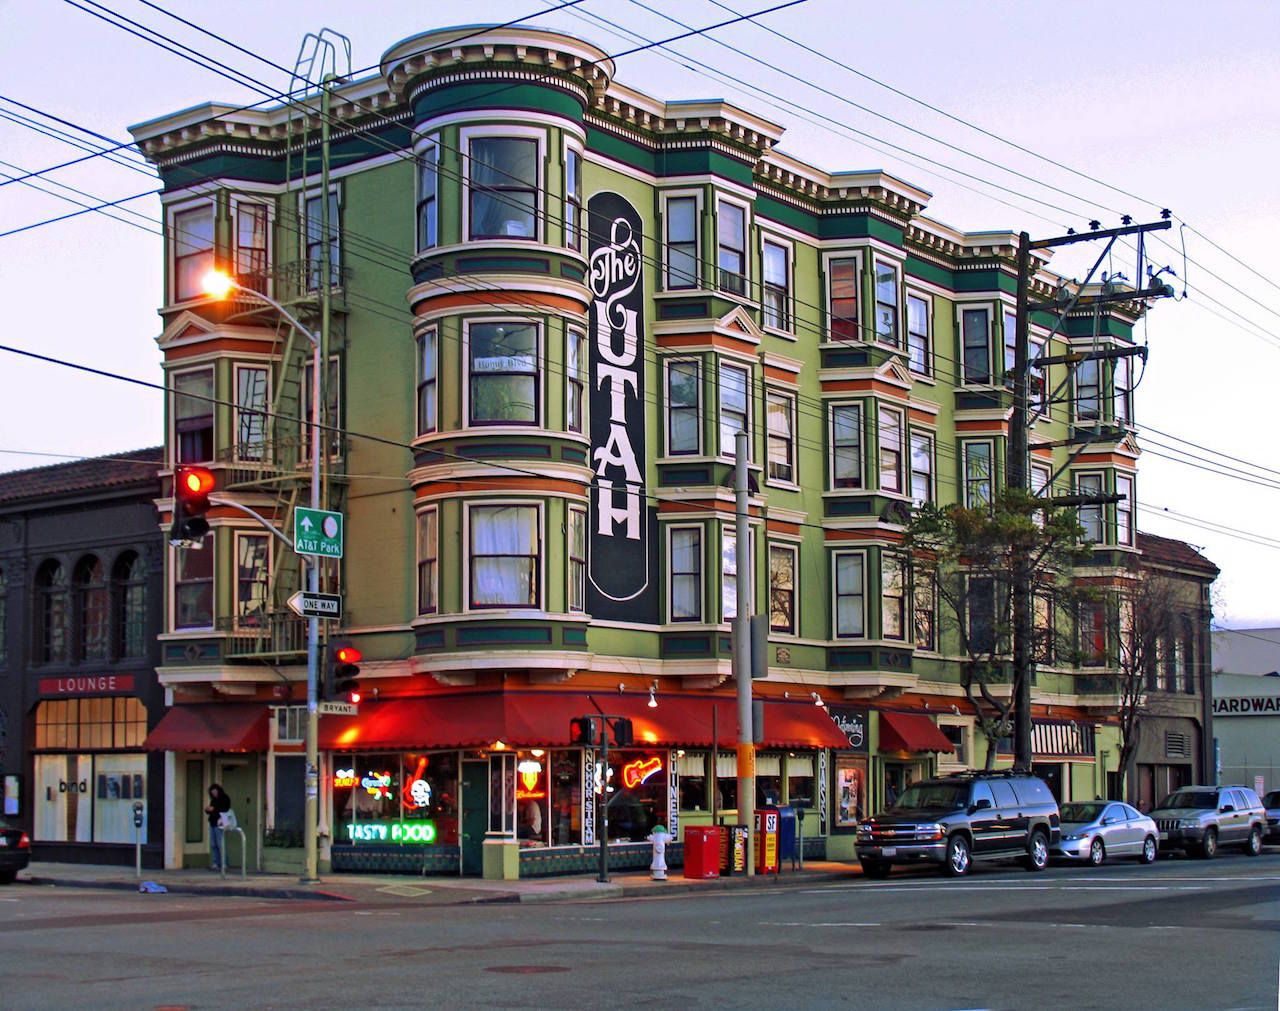 Looking for the best music venues in San Francisco? We've got your back.